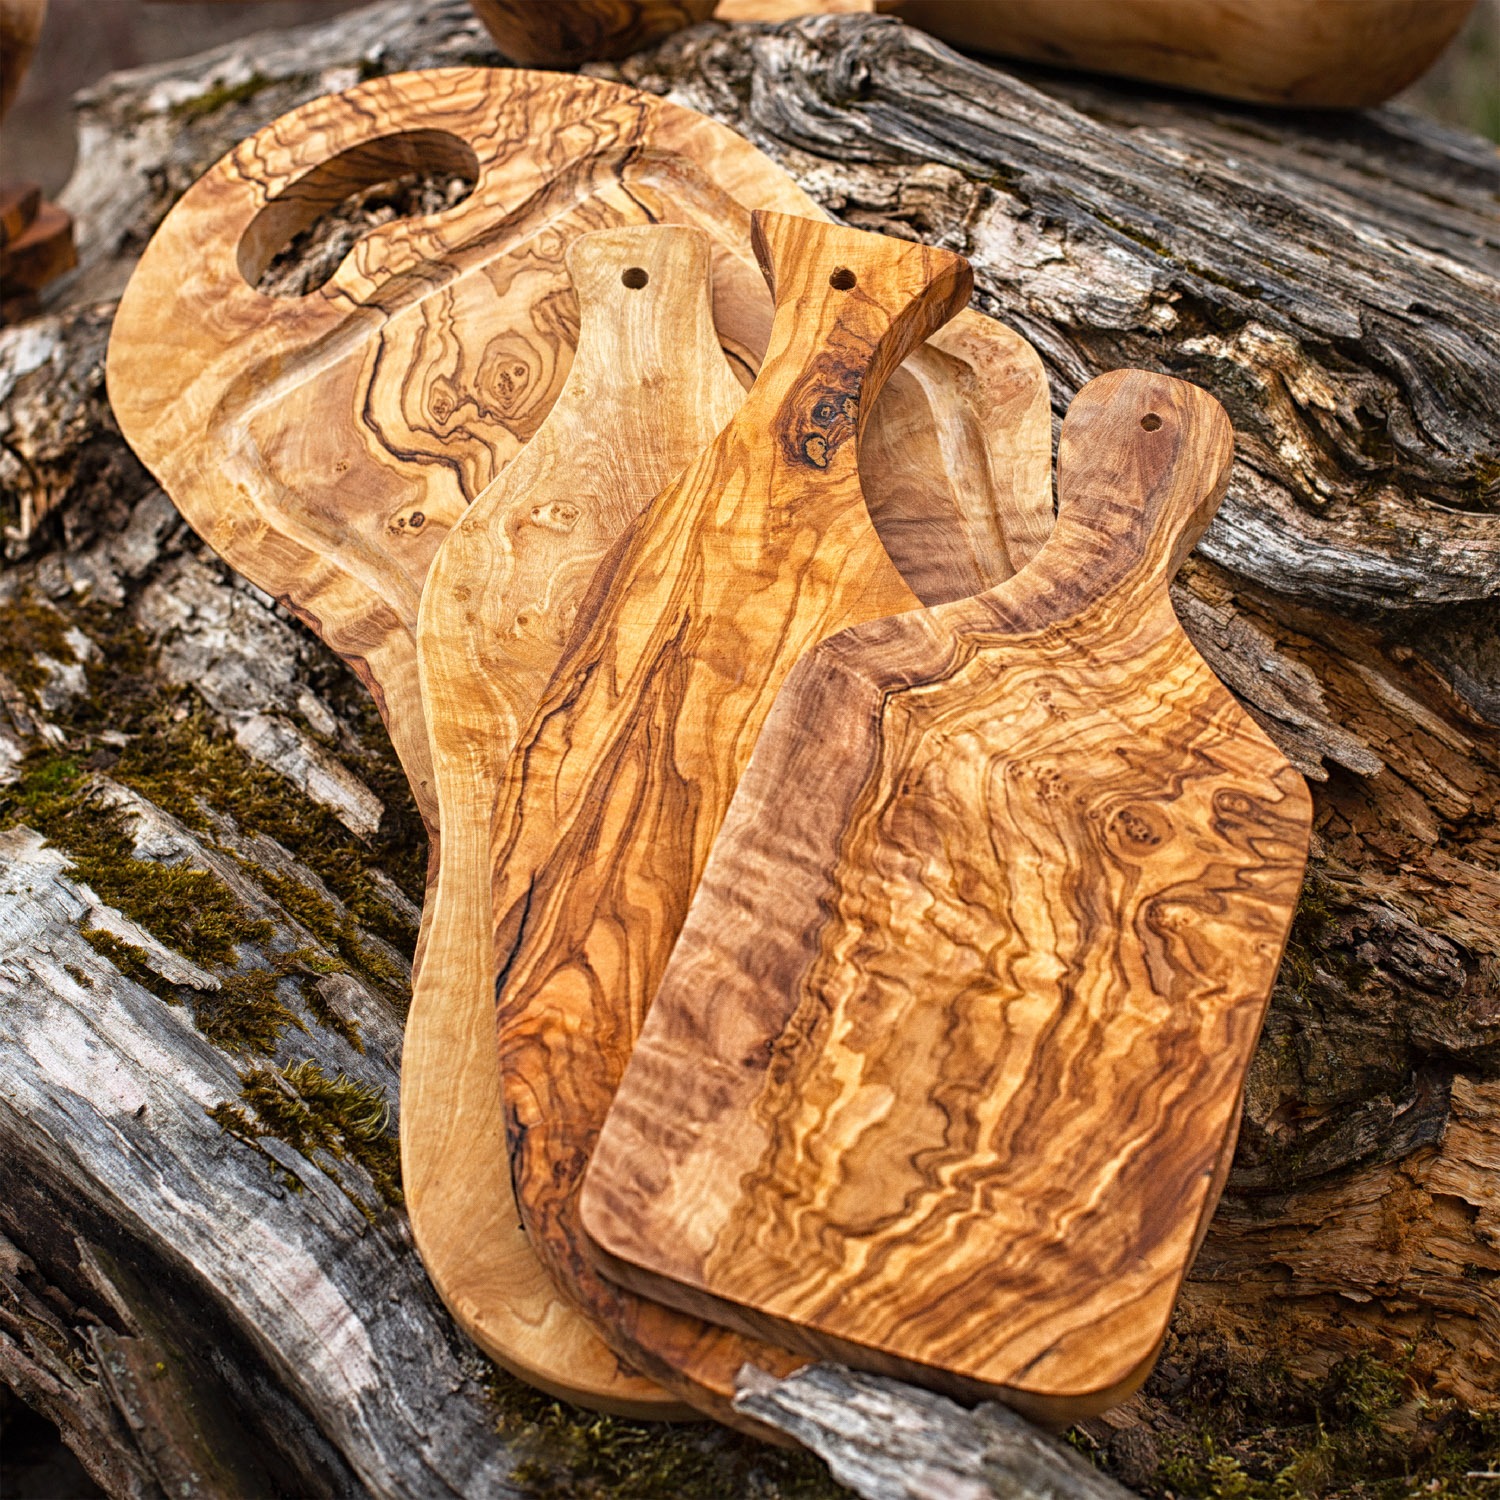 Wholesale Olive Wood Cutting Boards, Utensils & Coasters - Forest Decor